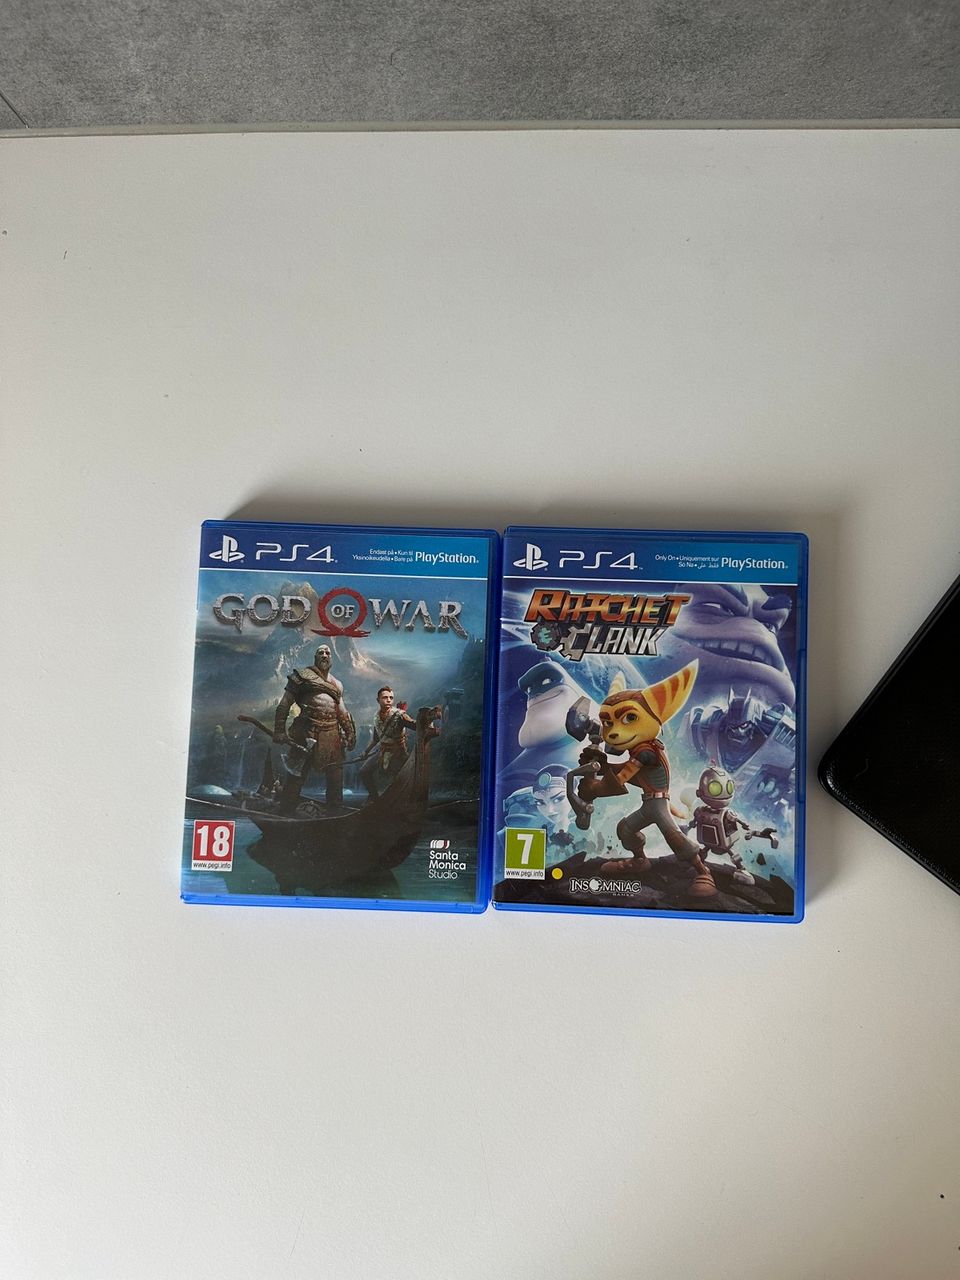 PS4 games (God of War and Ratchet & Clank)